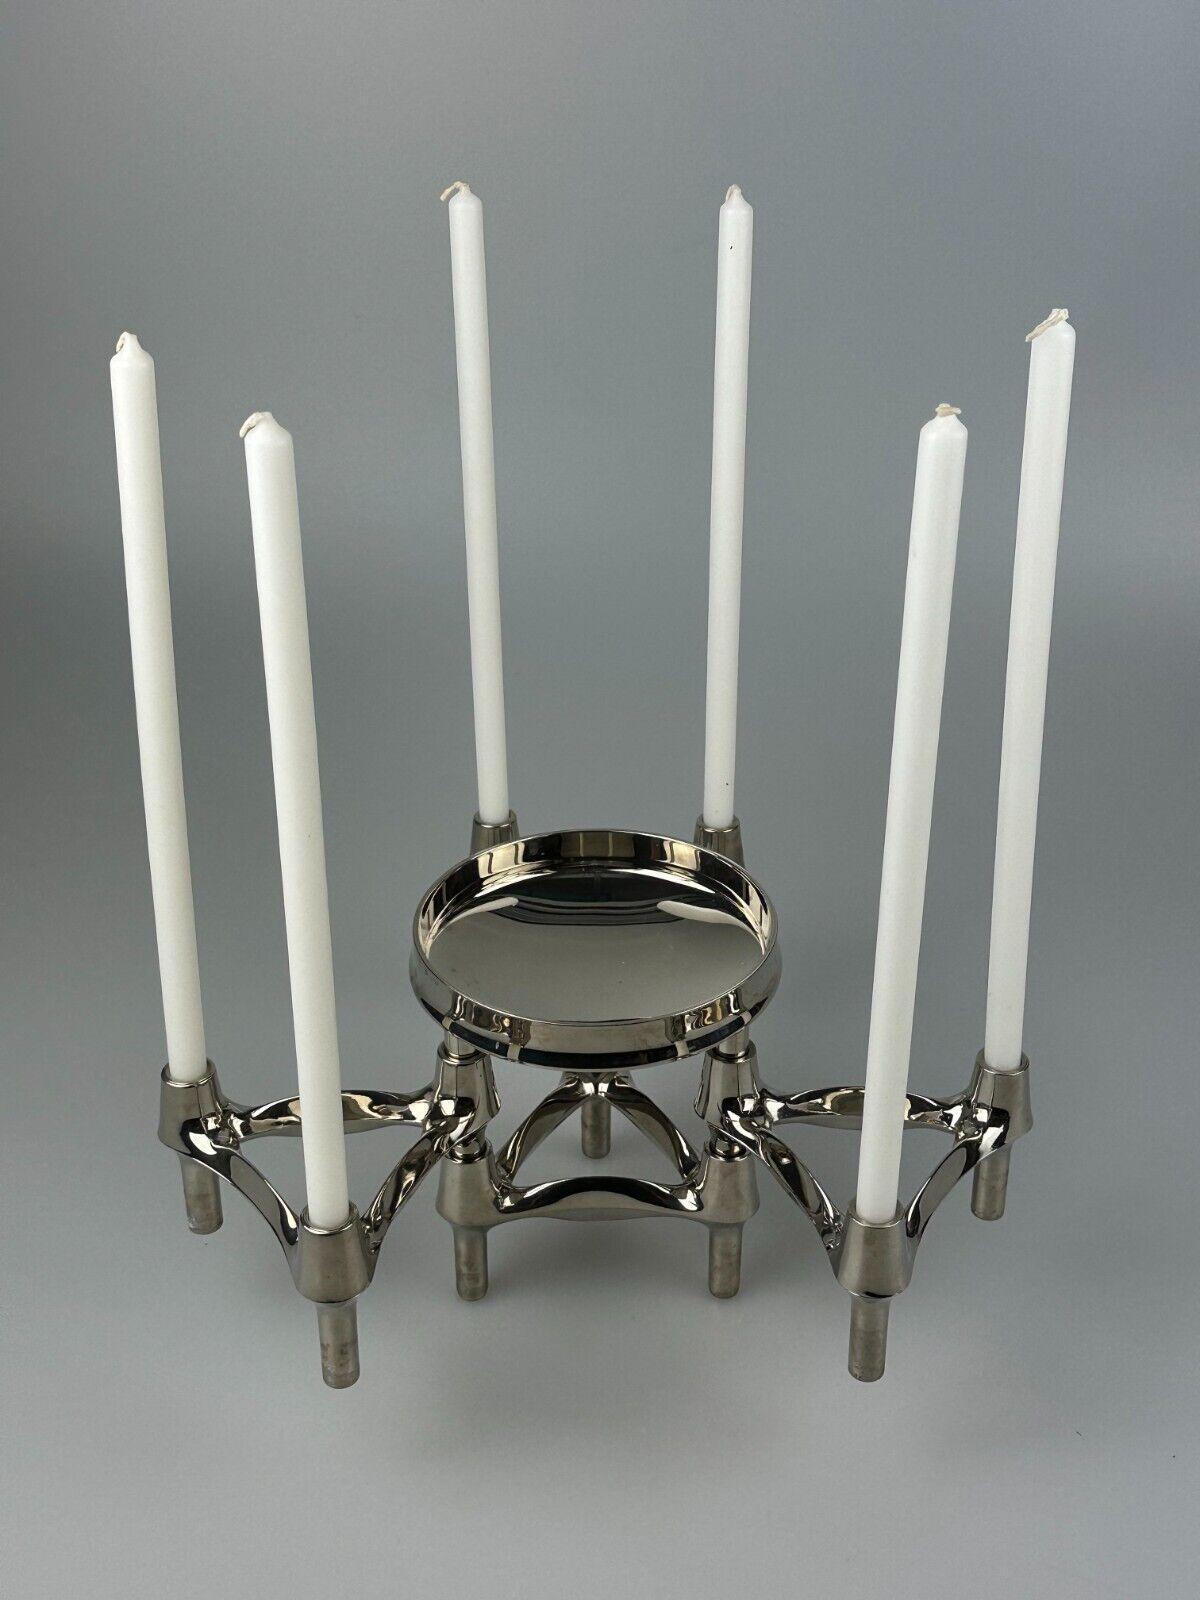 German 60s 70s BMF Nagel Quist candlestick 4 elements and bowl plug-in system